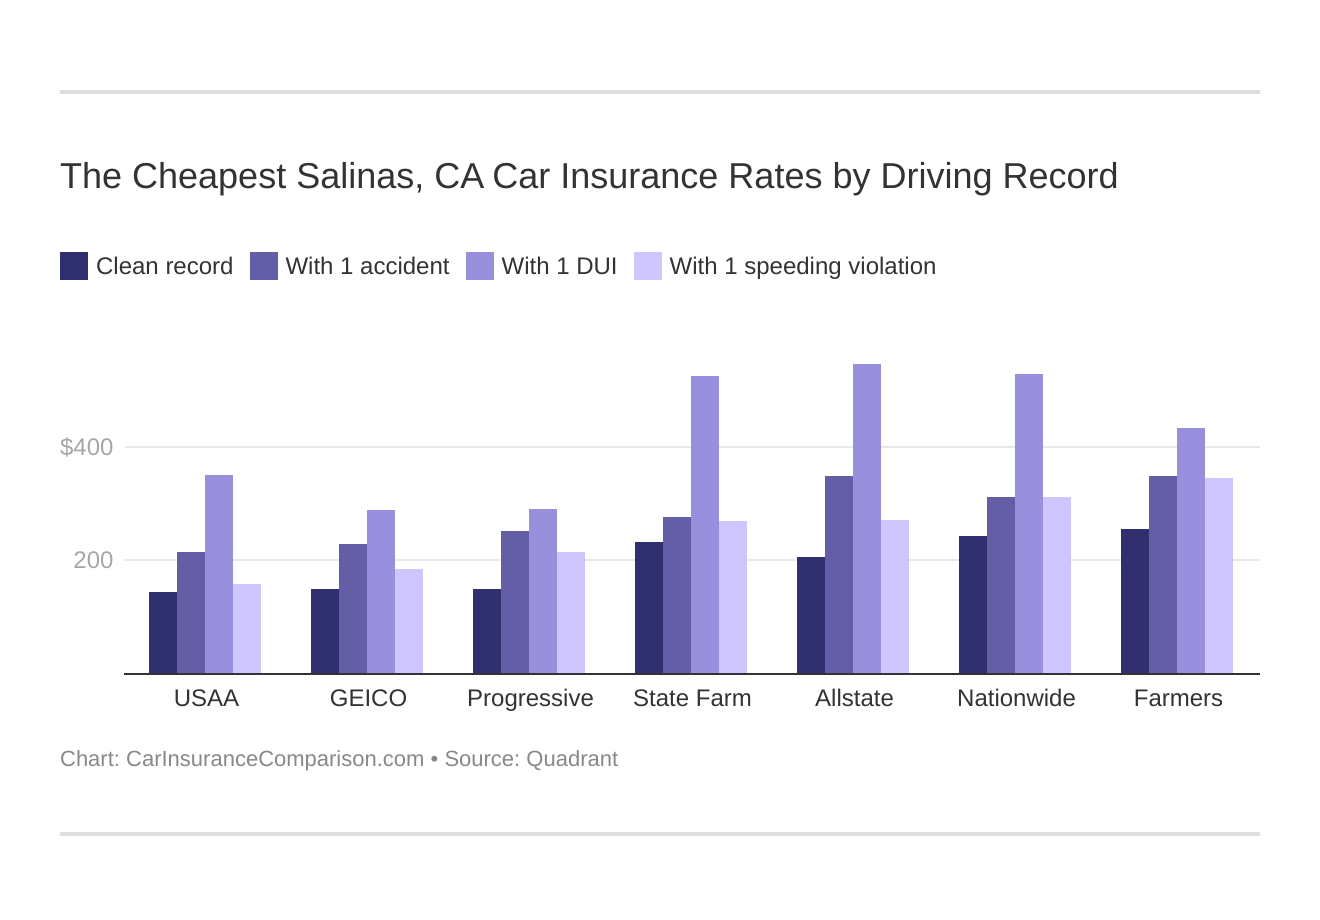 The Cheapest Salinas, CA Car Insurance Rates by Driving Record